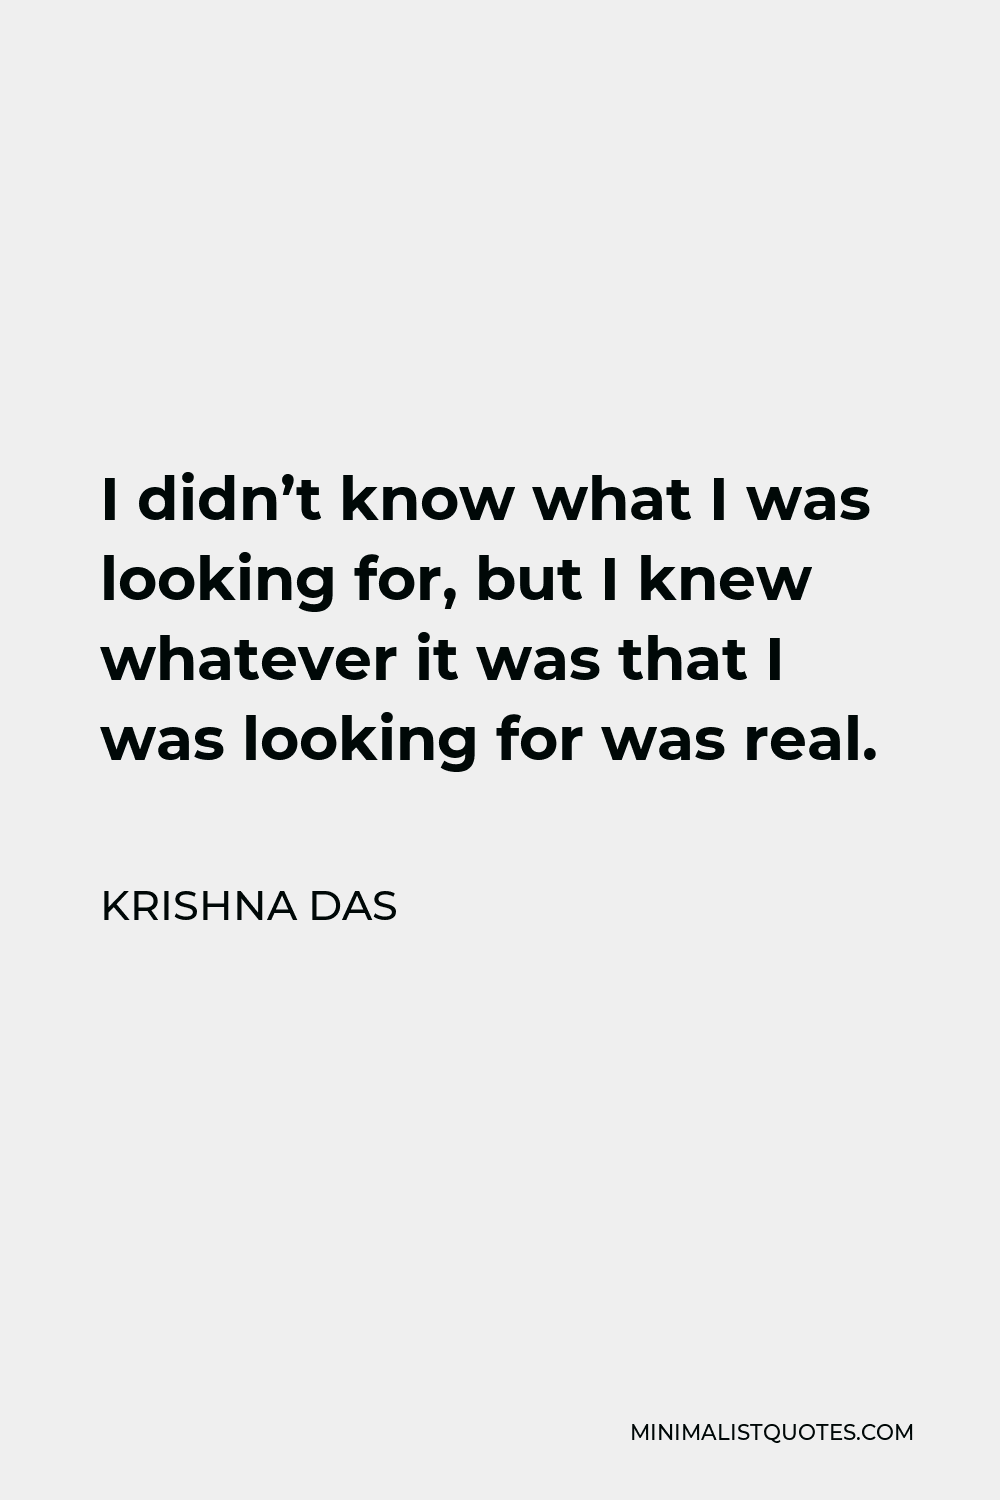 Krishna Das Quote - I didn’t know what I was looking for, but I knew whatever it was that I was looking for was real.